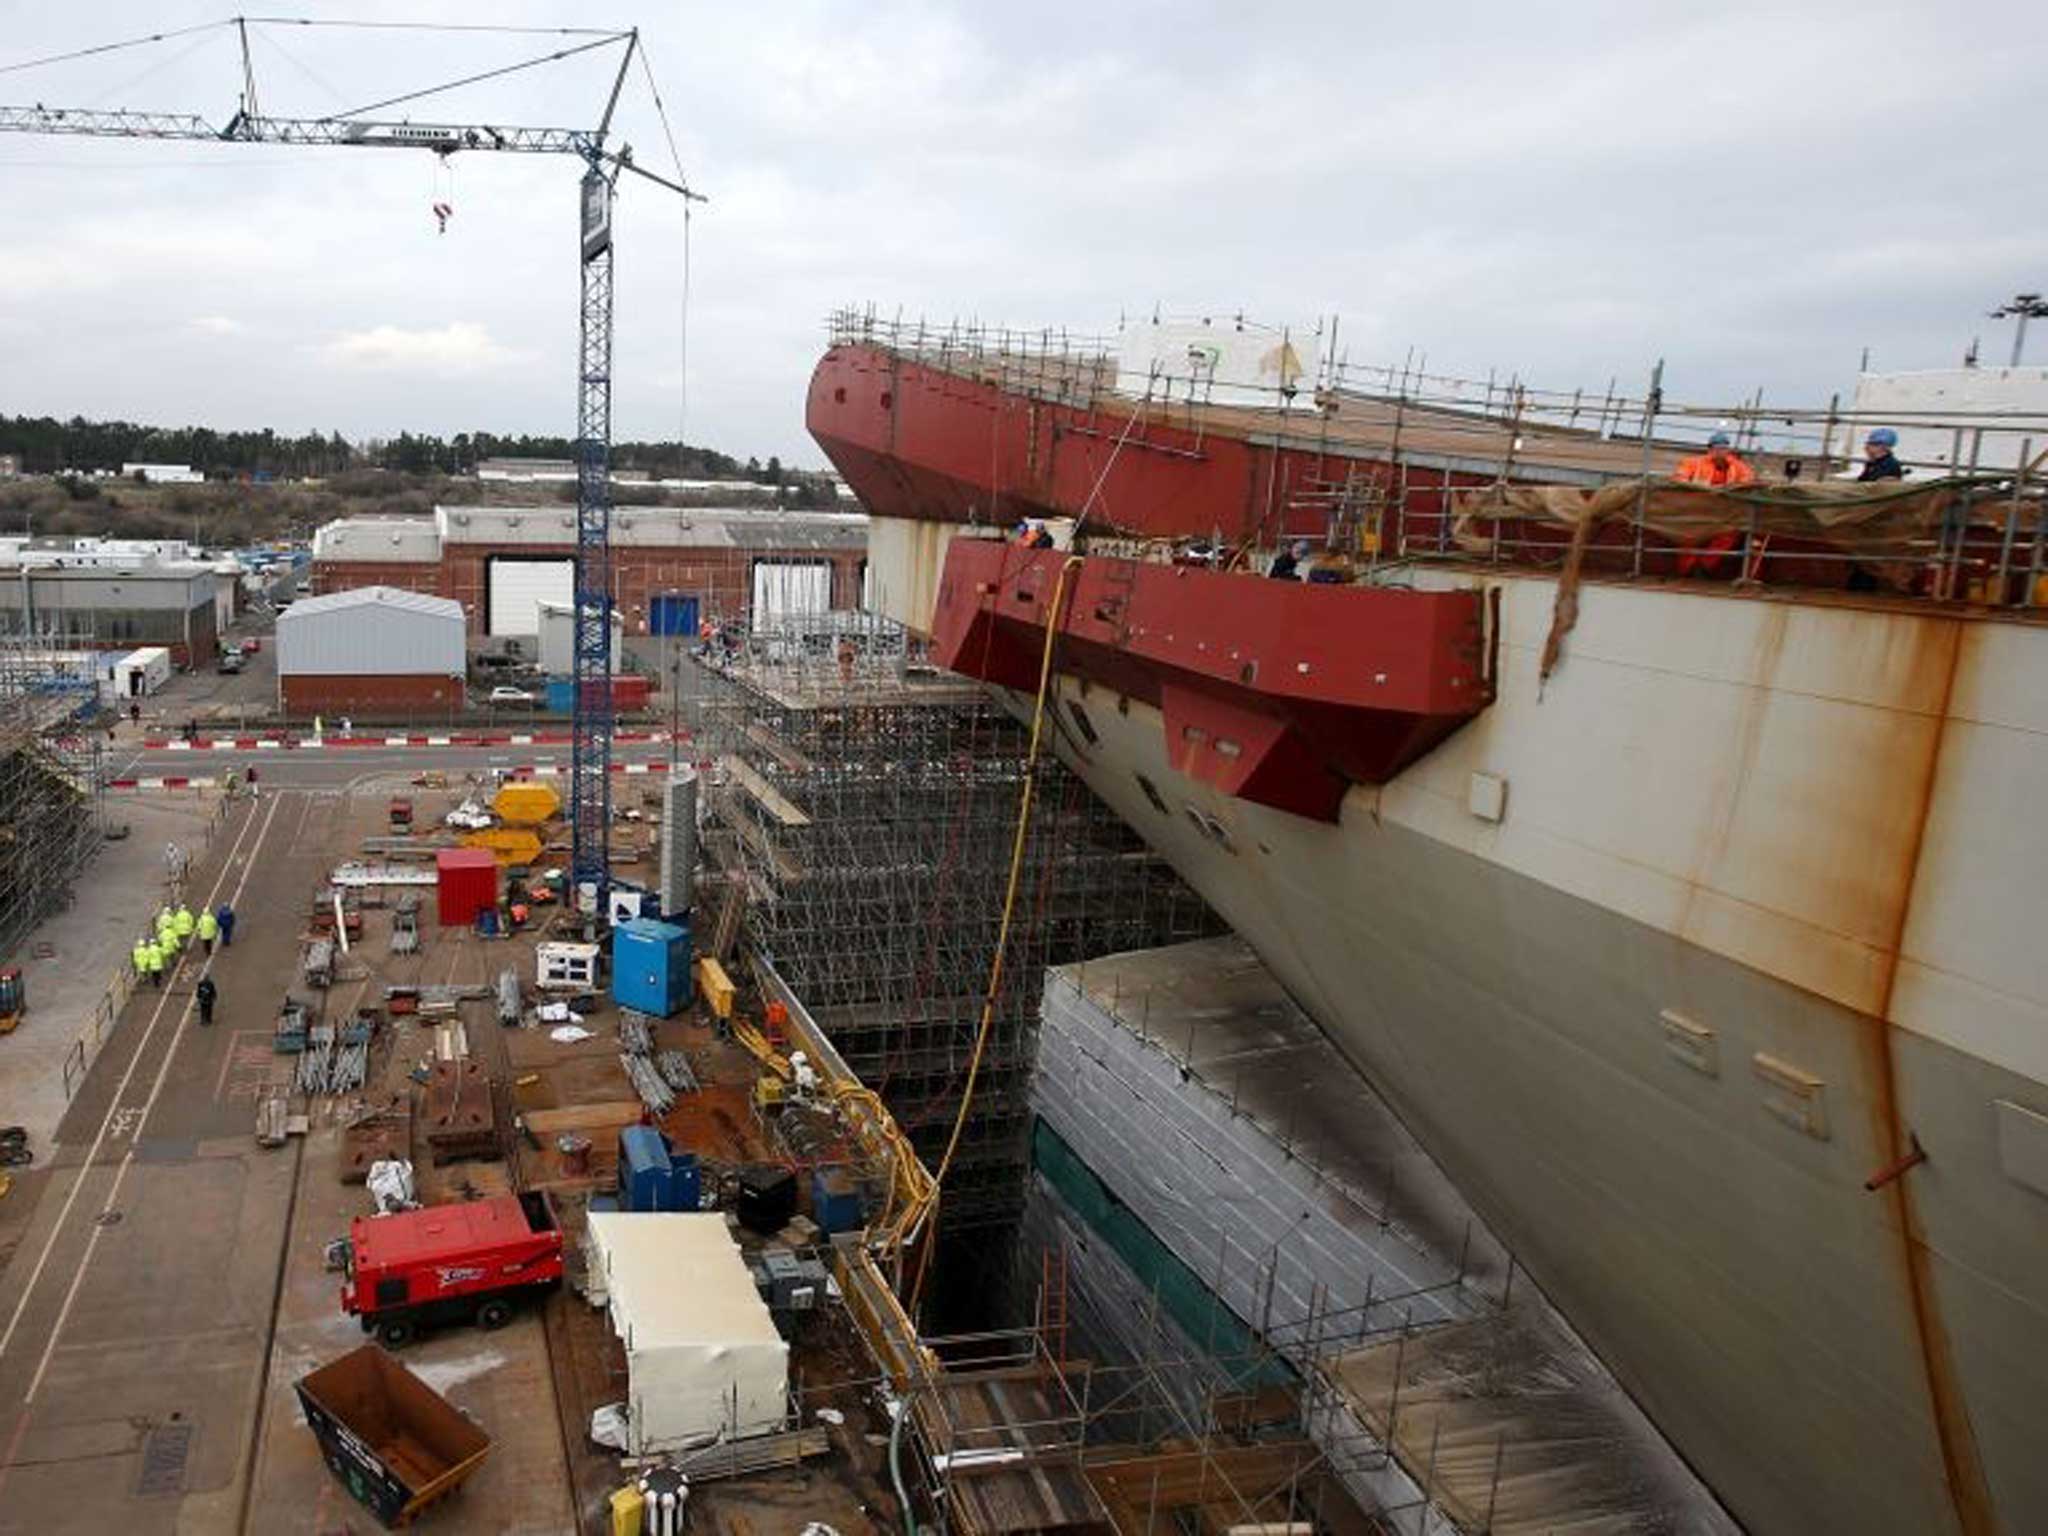 British carriers will be completed at Rosyth, says a senior naval source